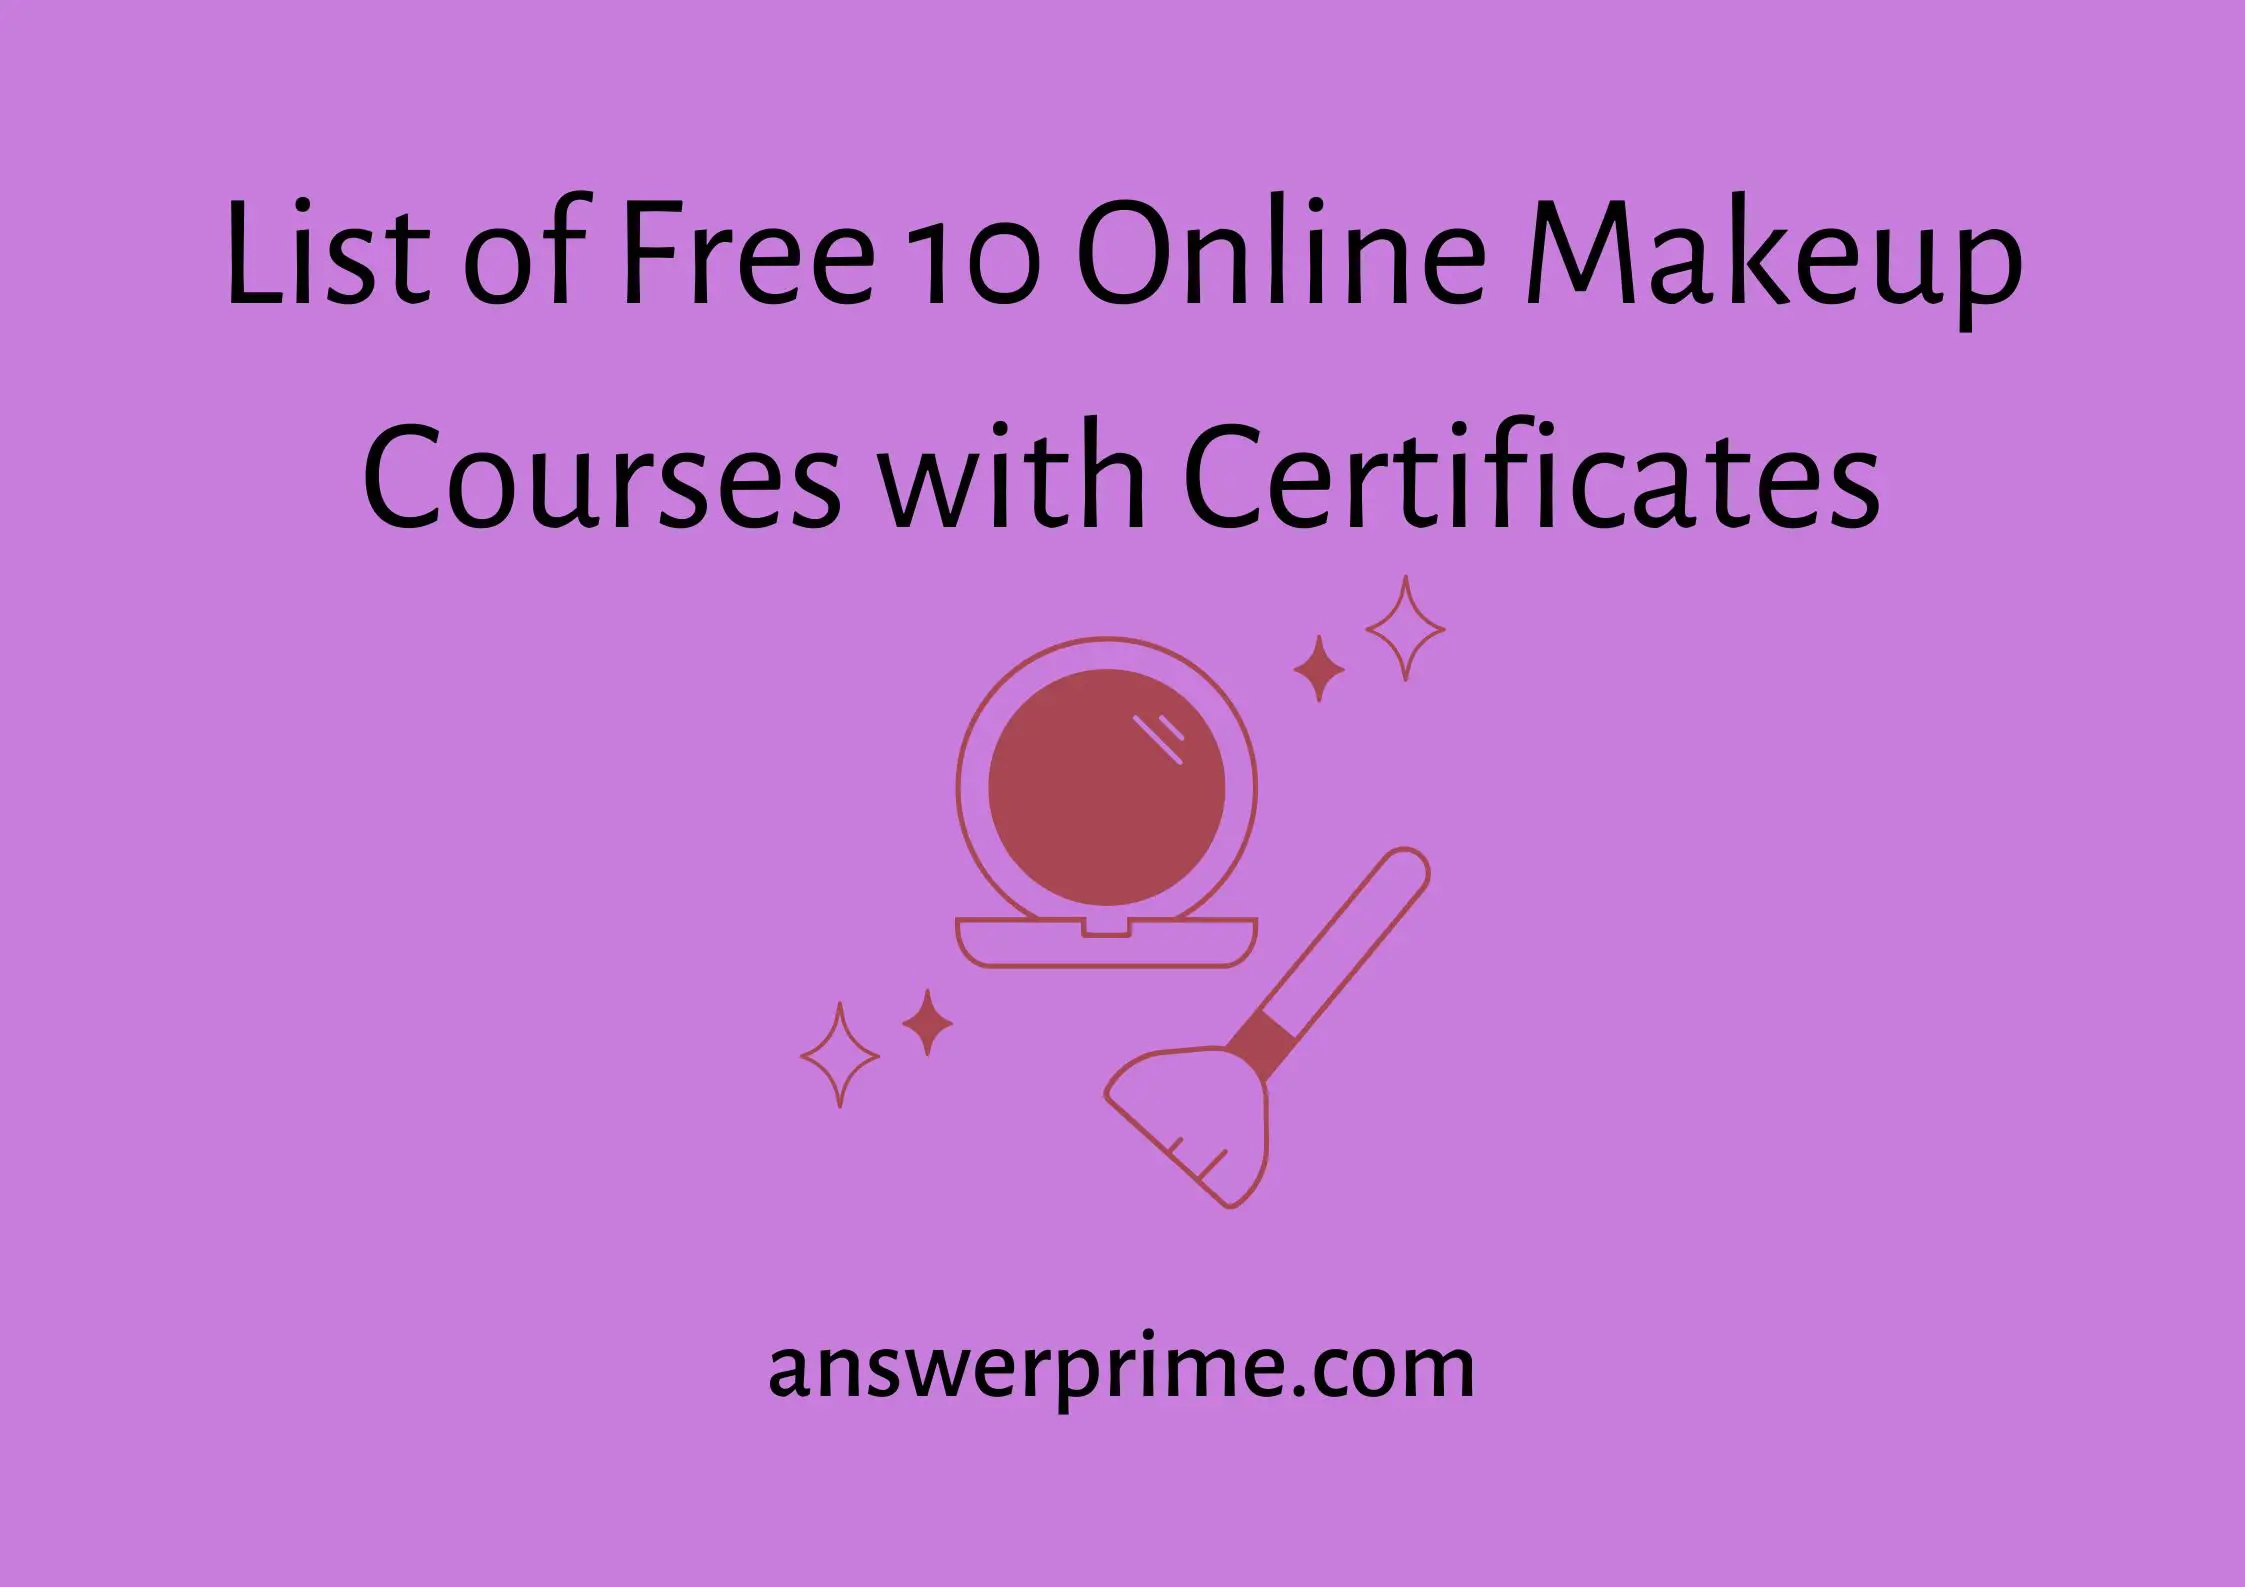 List of 10 Free Online Makeup Courses with Certificates